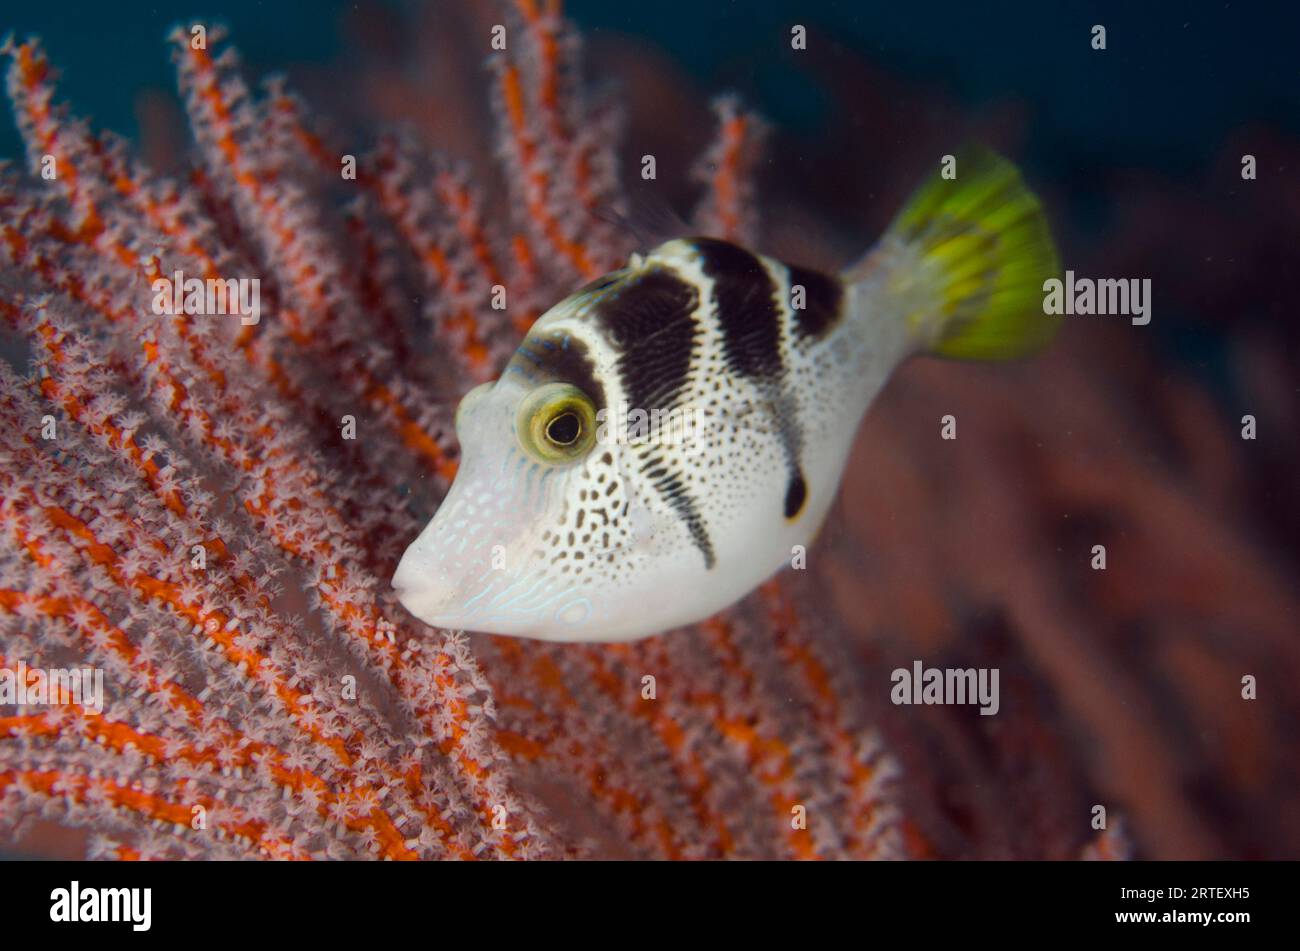 Mimic Filefish, Paraluteres prionurus, mimic the highly poisonous pufferfish Saddled Puffer, Canthigaster valentini, by sea fan, Jetty dive site, Pada Stock Photo